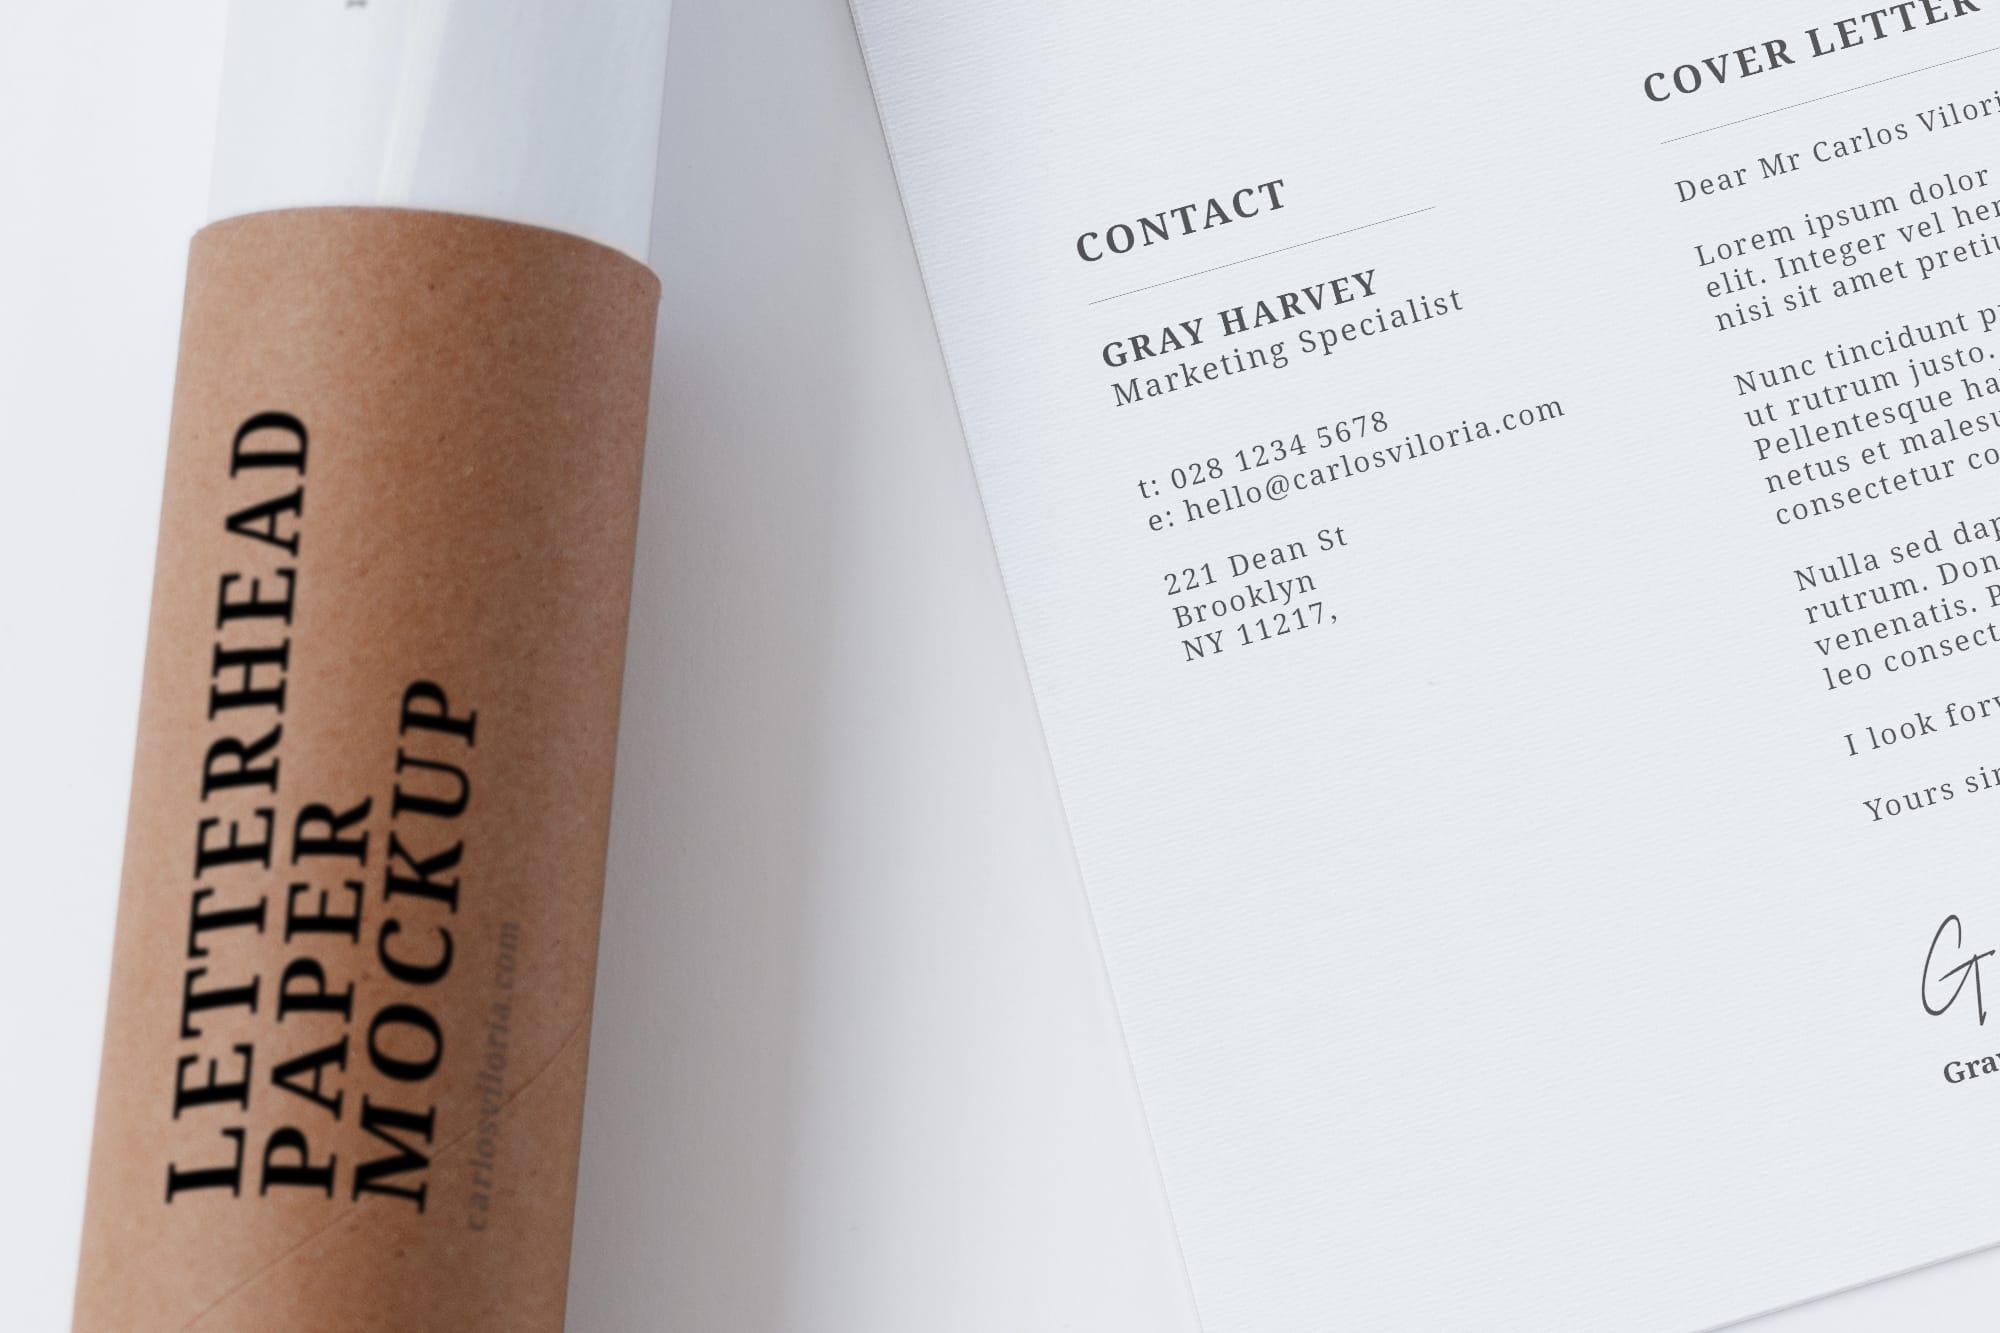 Free Letterhead Paper and Craft Tube Mockup